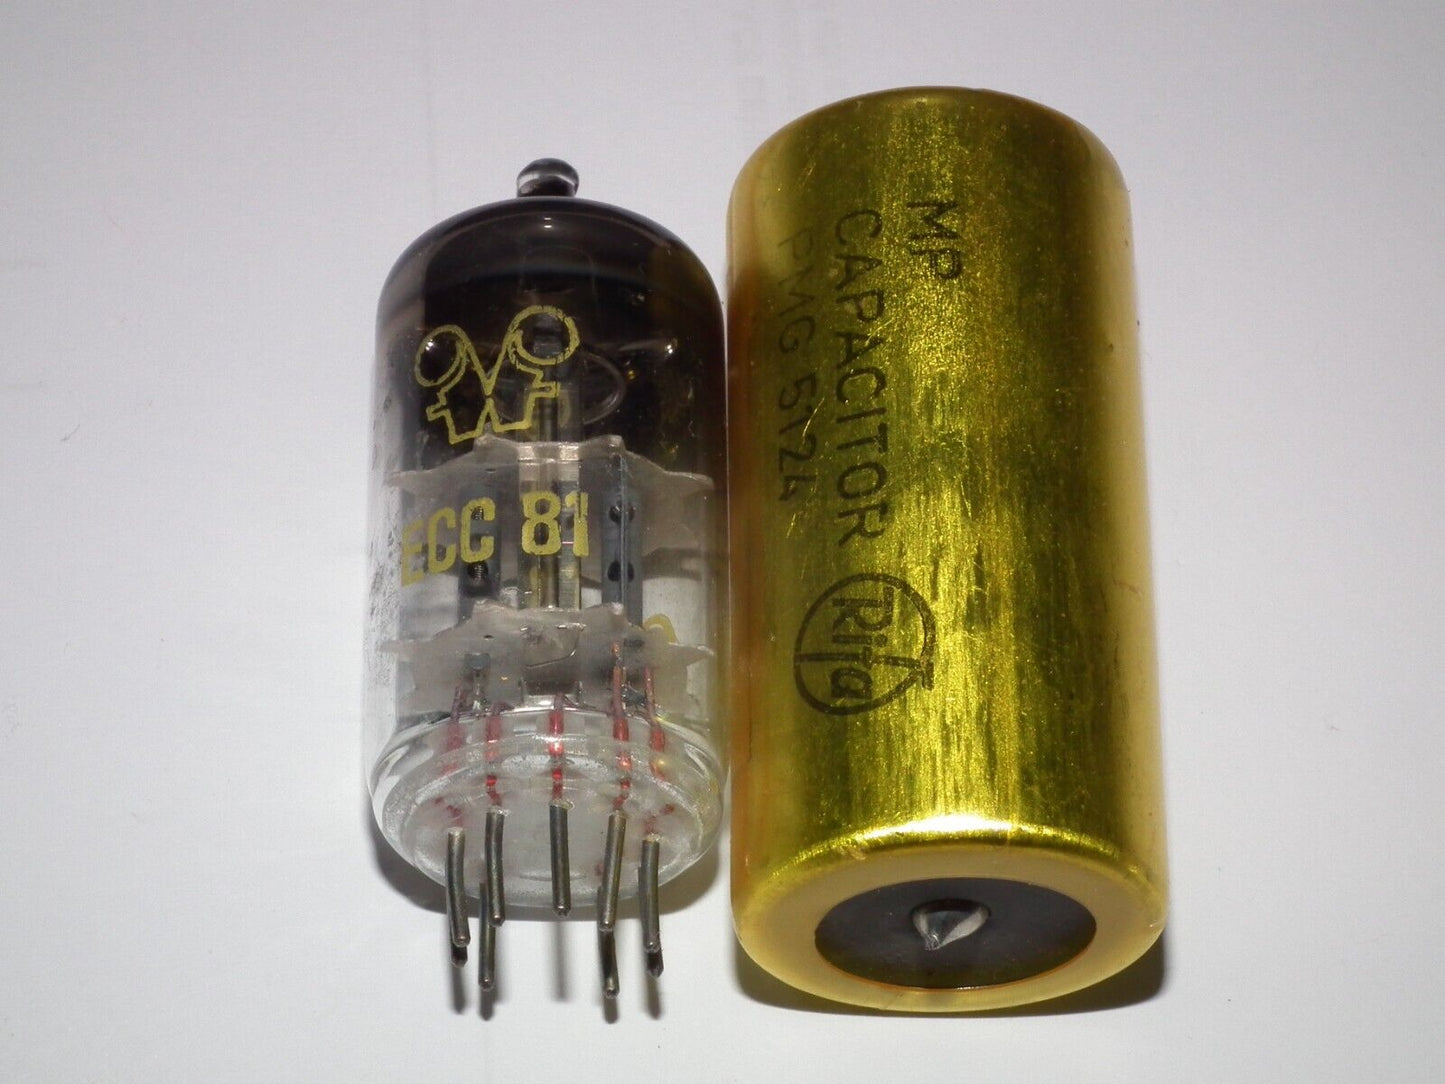 One vintage MP capacitors 2 uF / 400V Rifa Sweden (PIO - Paper in oil) Pull out